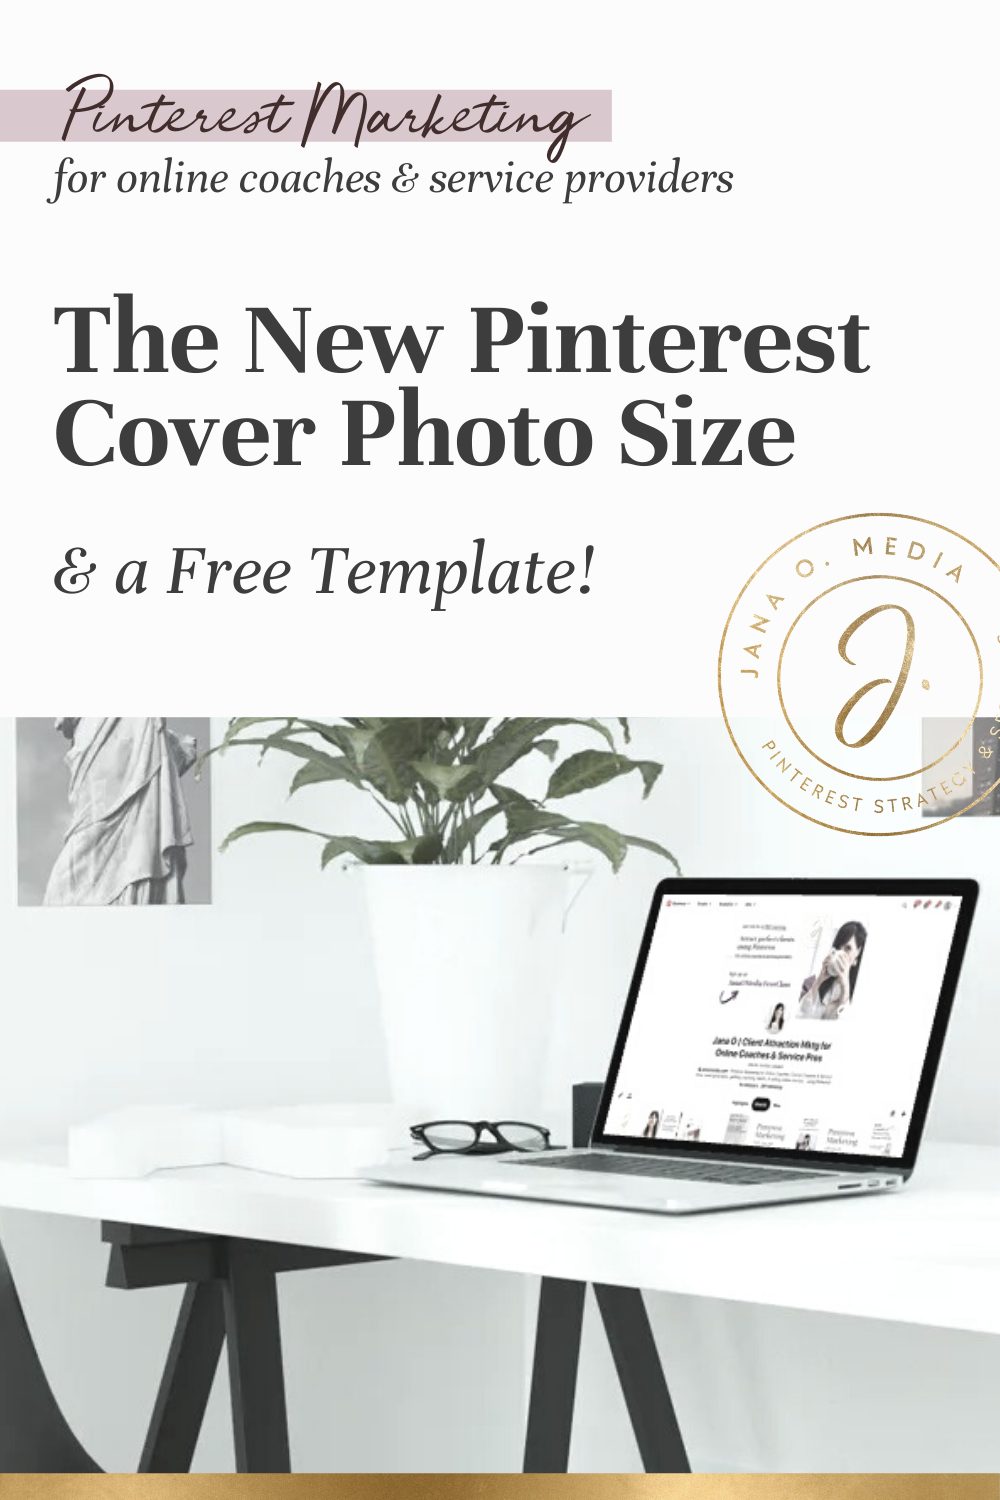 New Pinterest Cover Photo Size & Free Canva Template - with a Call to Action to Grow Your Coaching Business's Audience & Get Clients